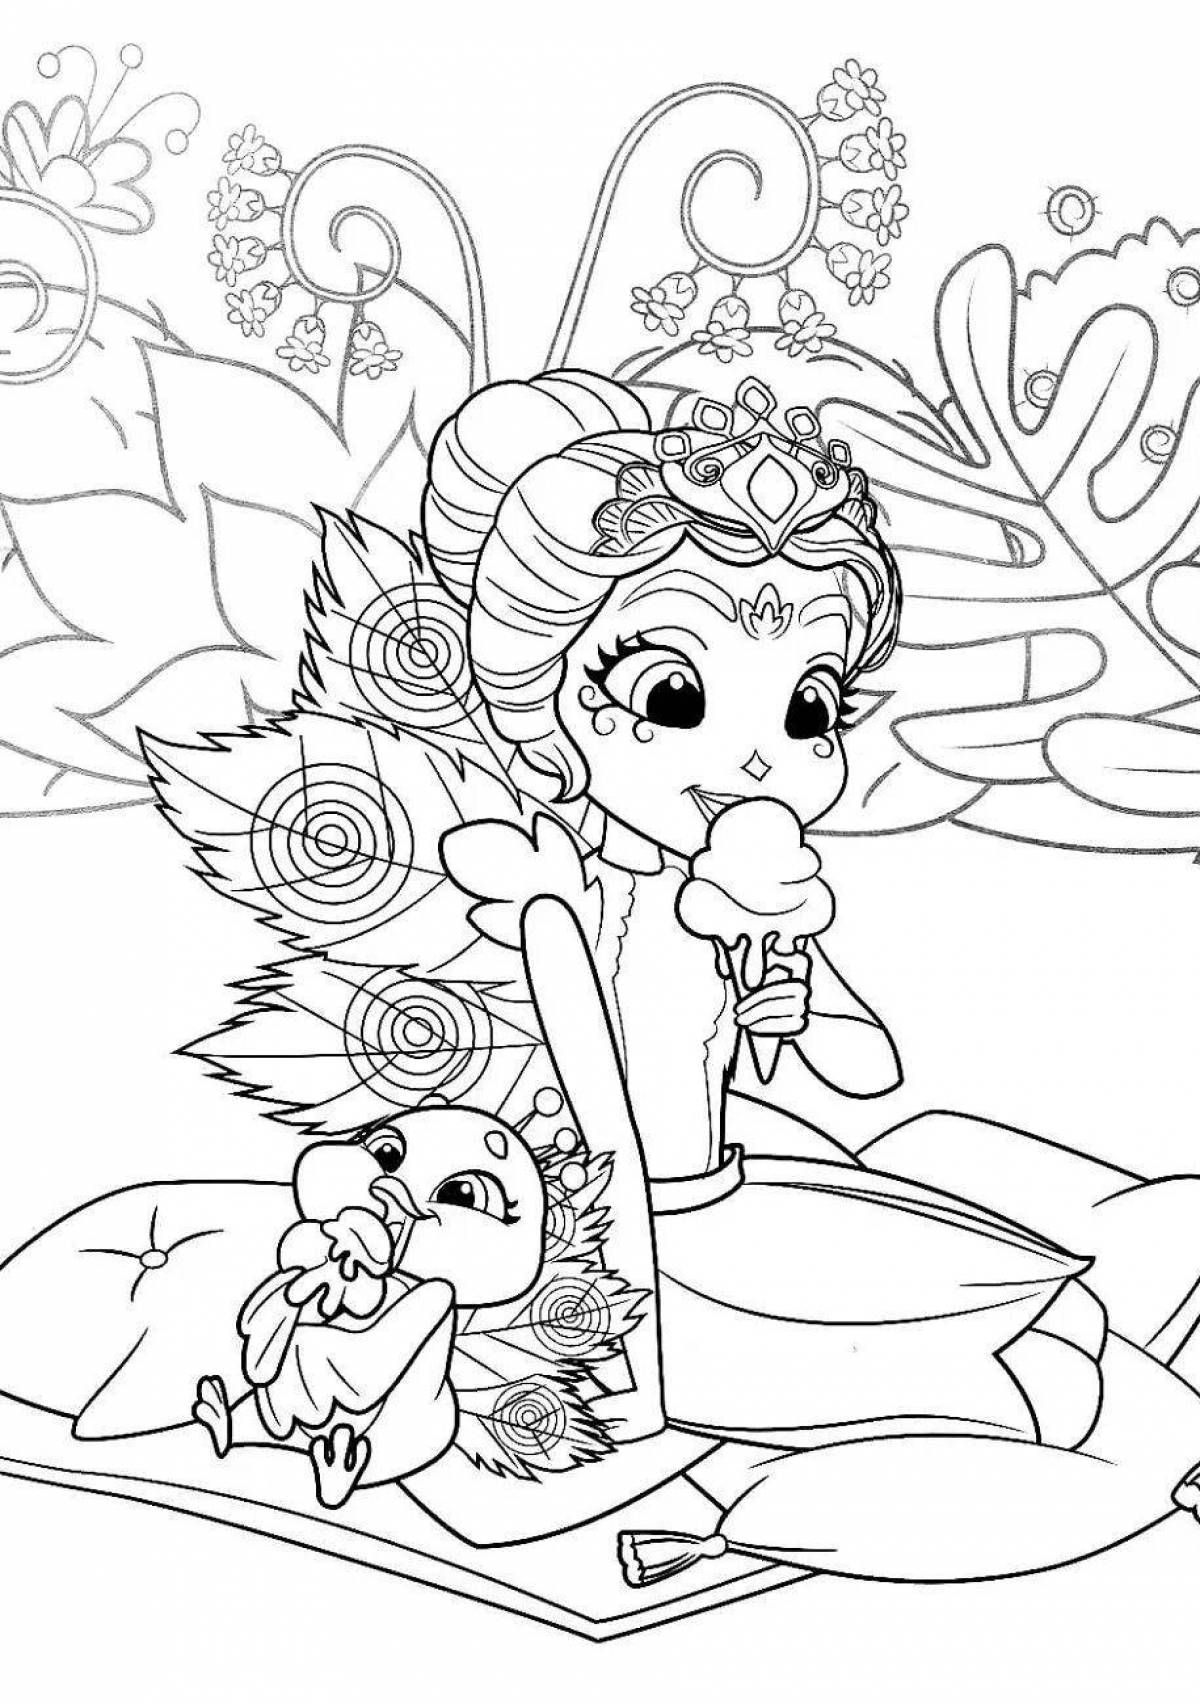 Delightful inchanchimals coloring pages